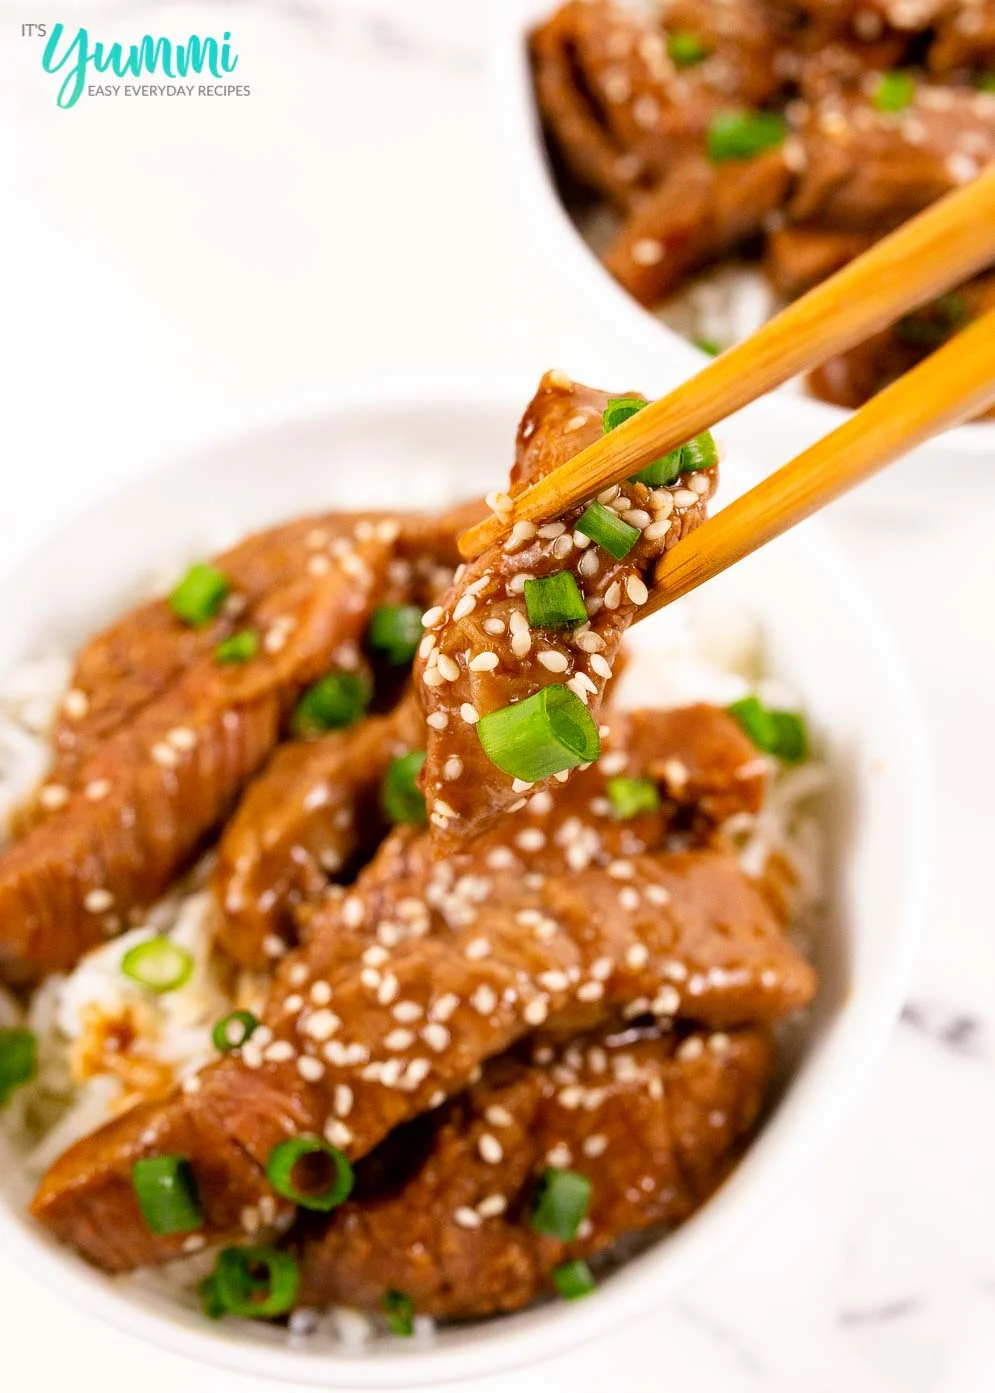 Close-up shot of chopsticks holding a piece of pf changs mongolian beef strip with scallions and sesame seeds on top